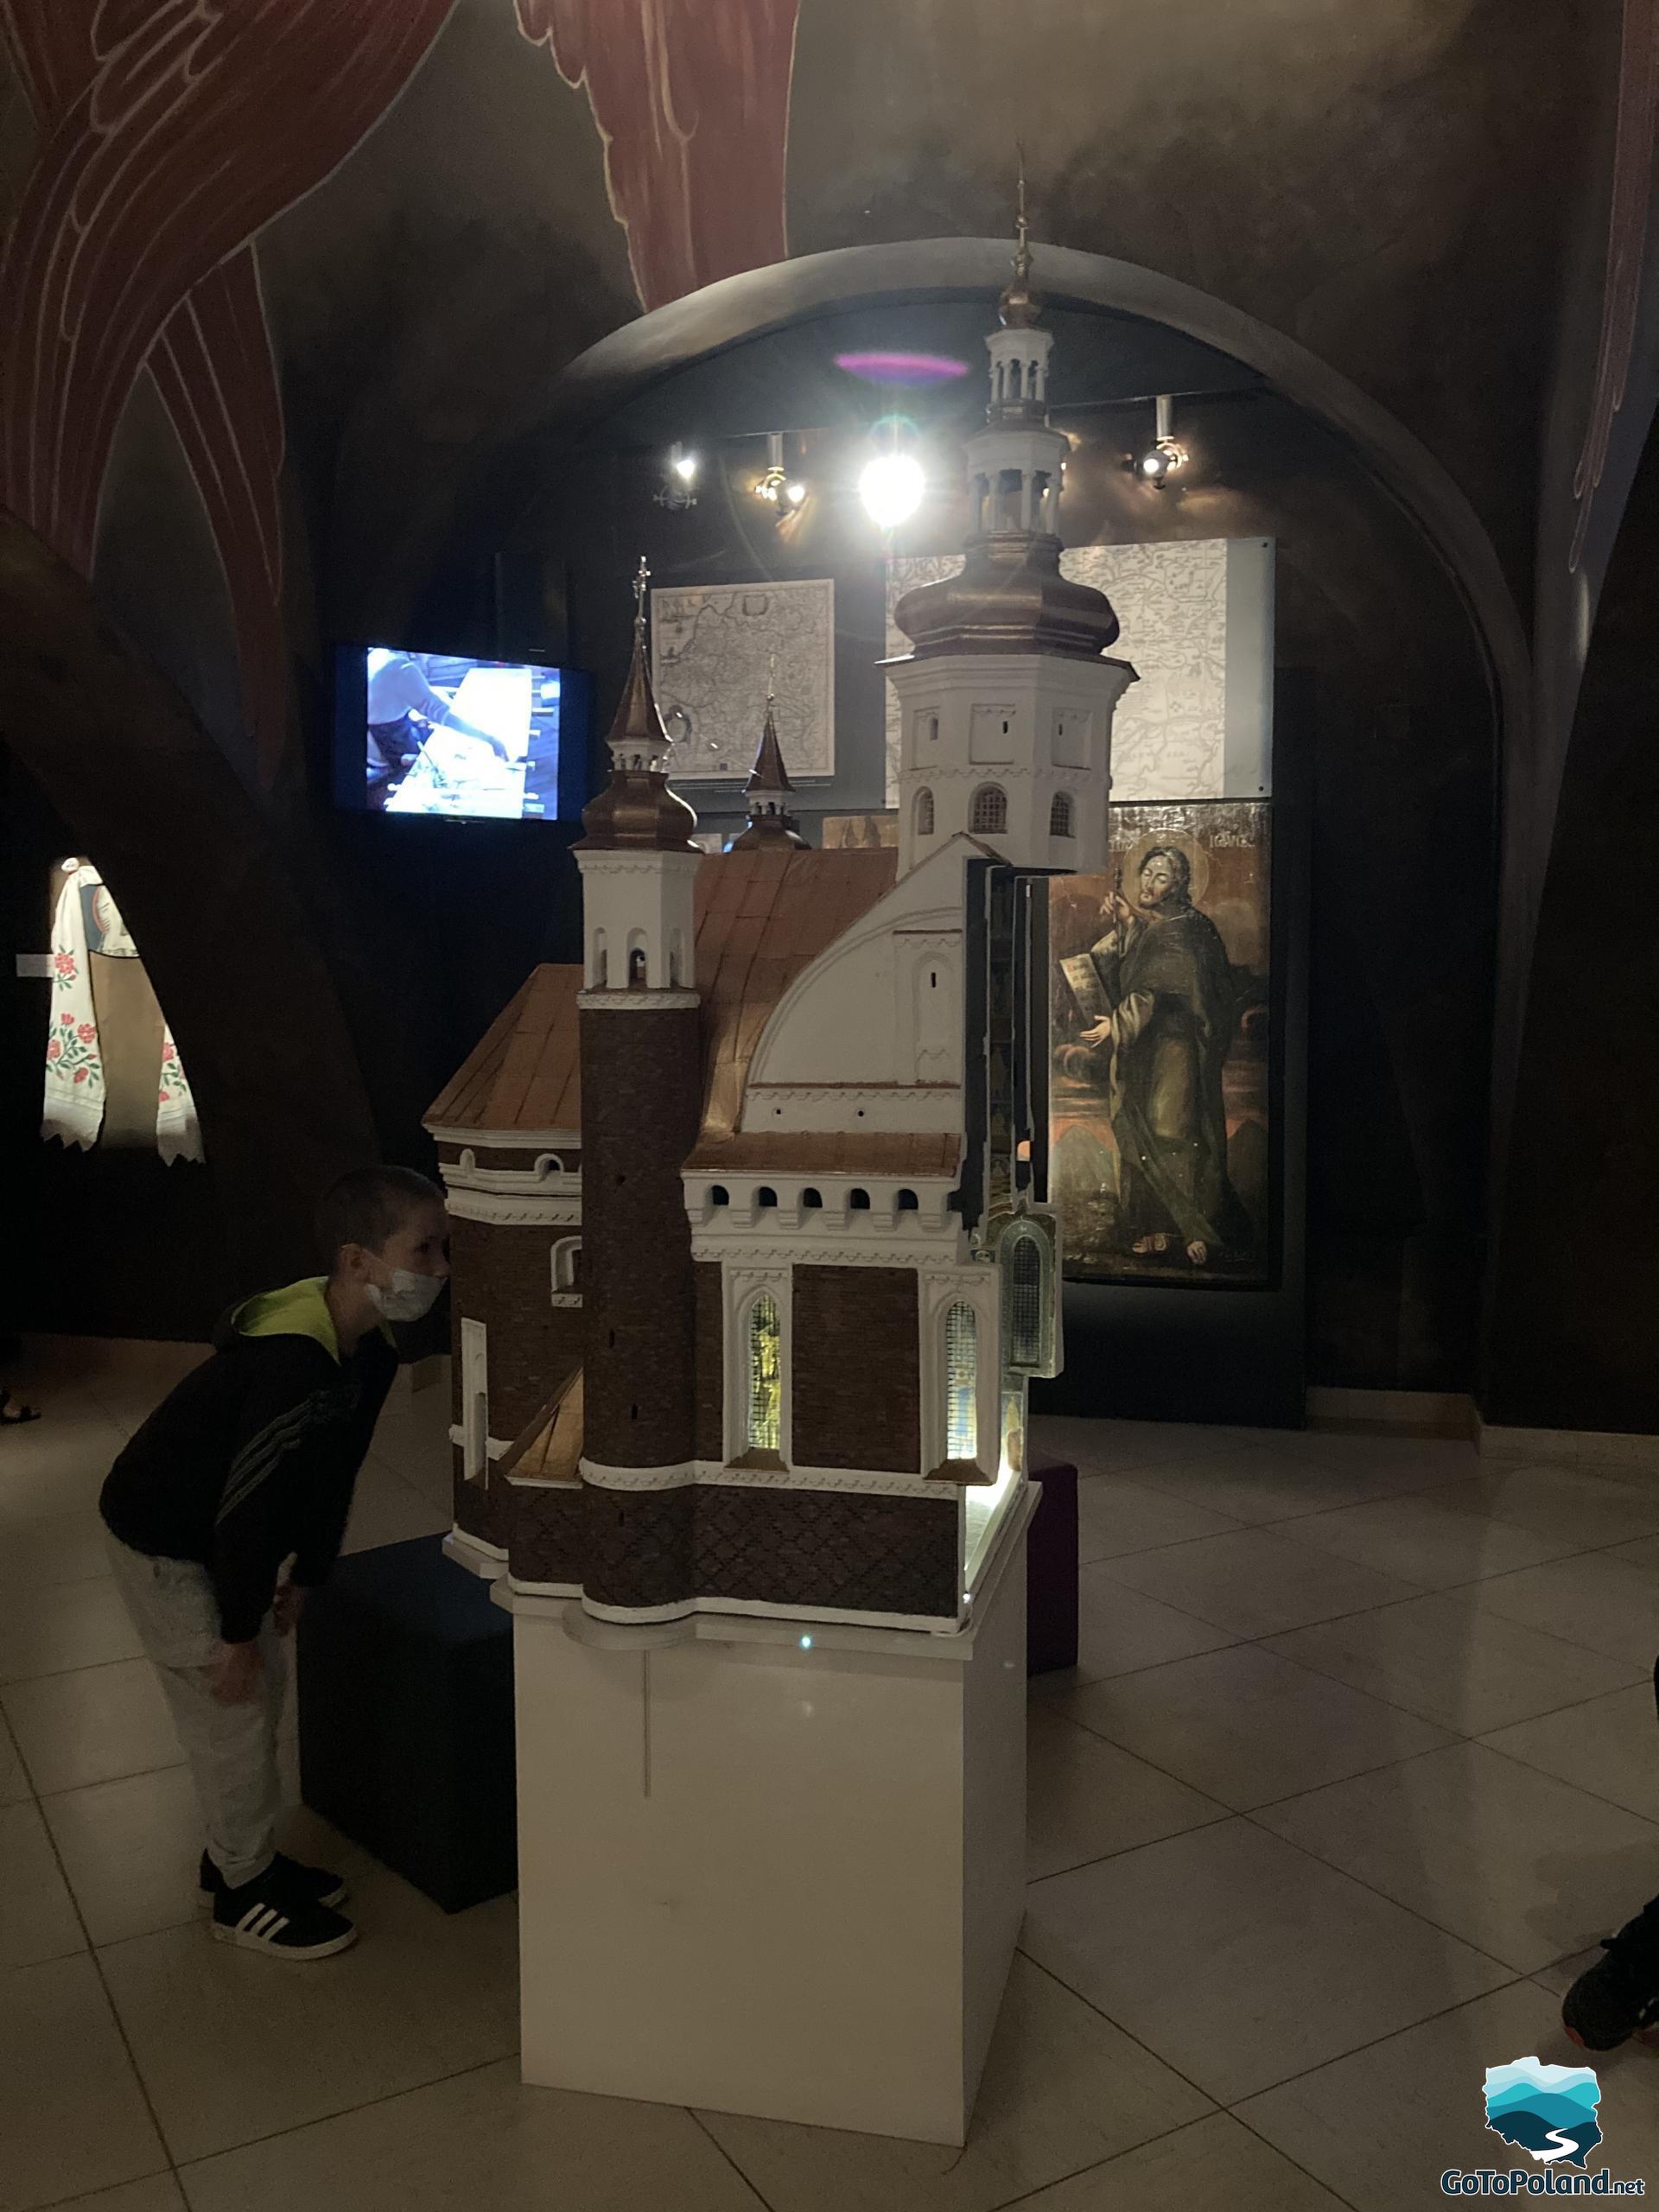 the boy is looking at the model of the monastery